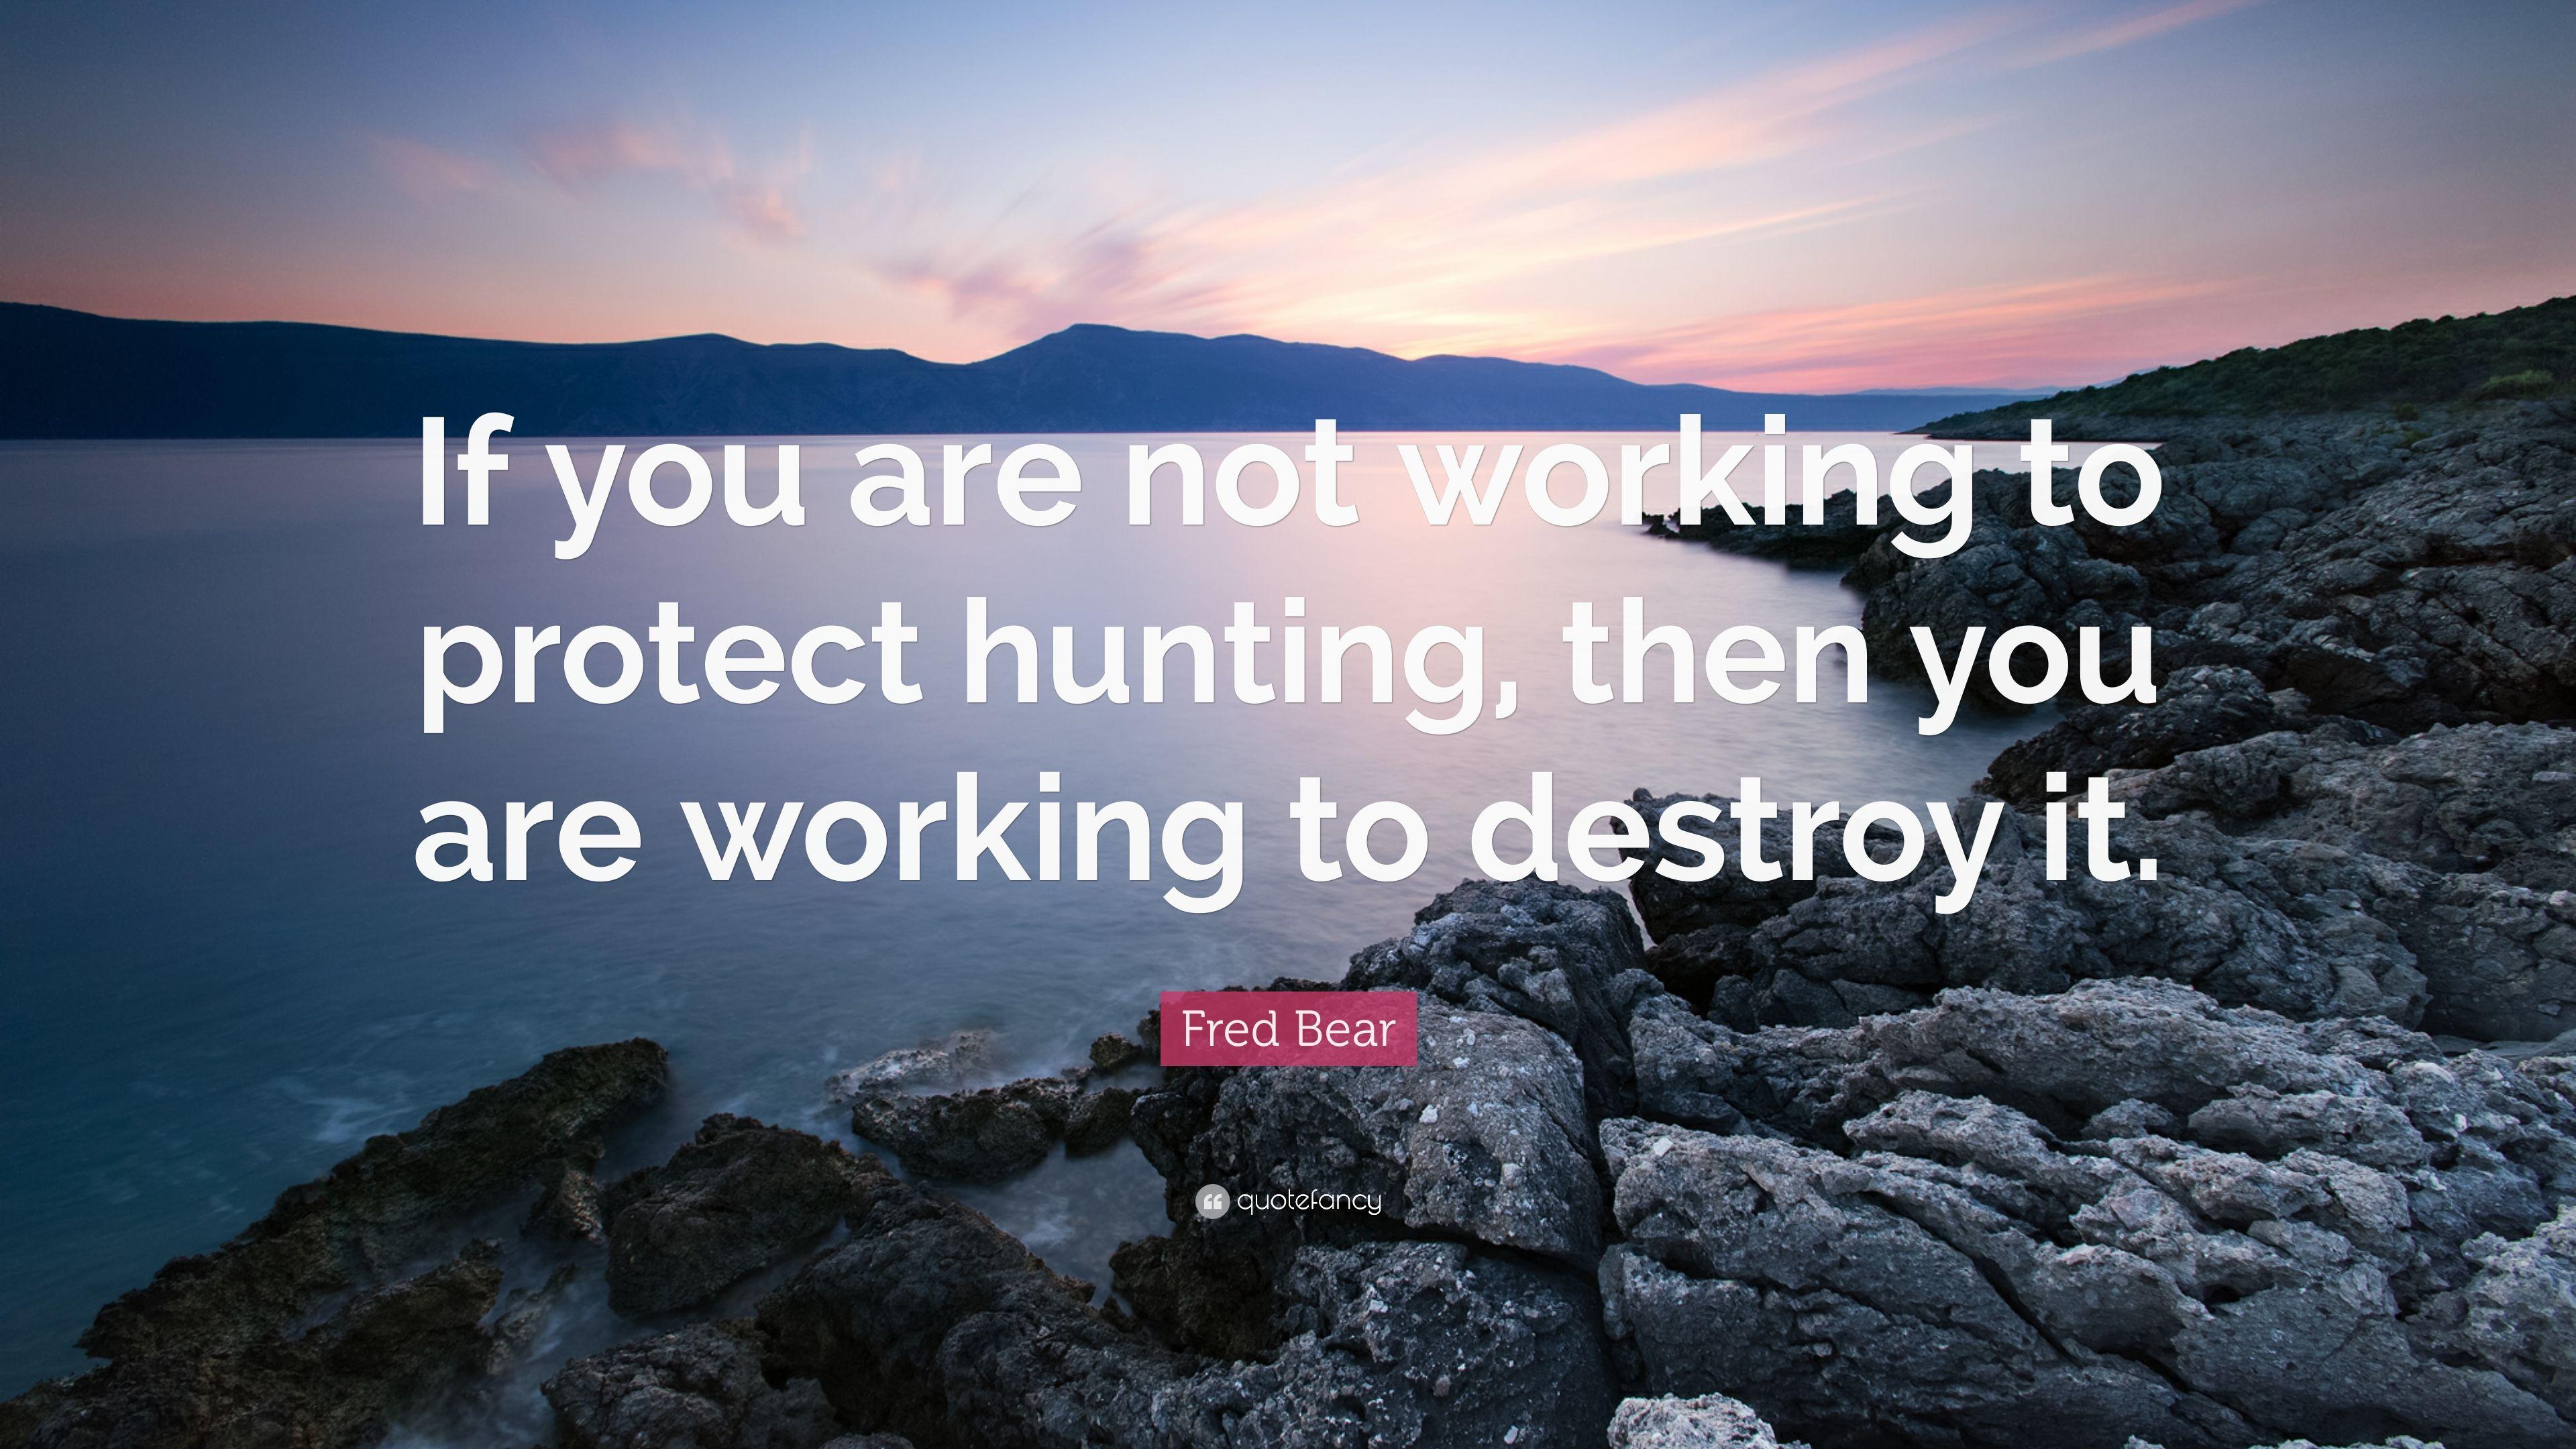 Fred Bear Quote: “If you are not working to protect hunting, then